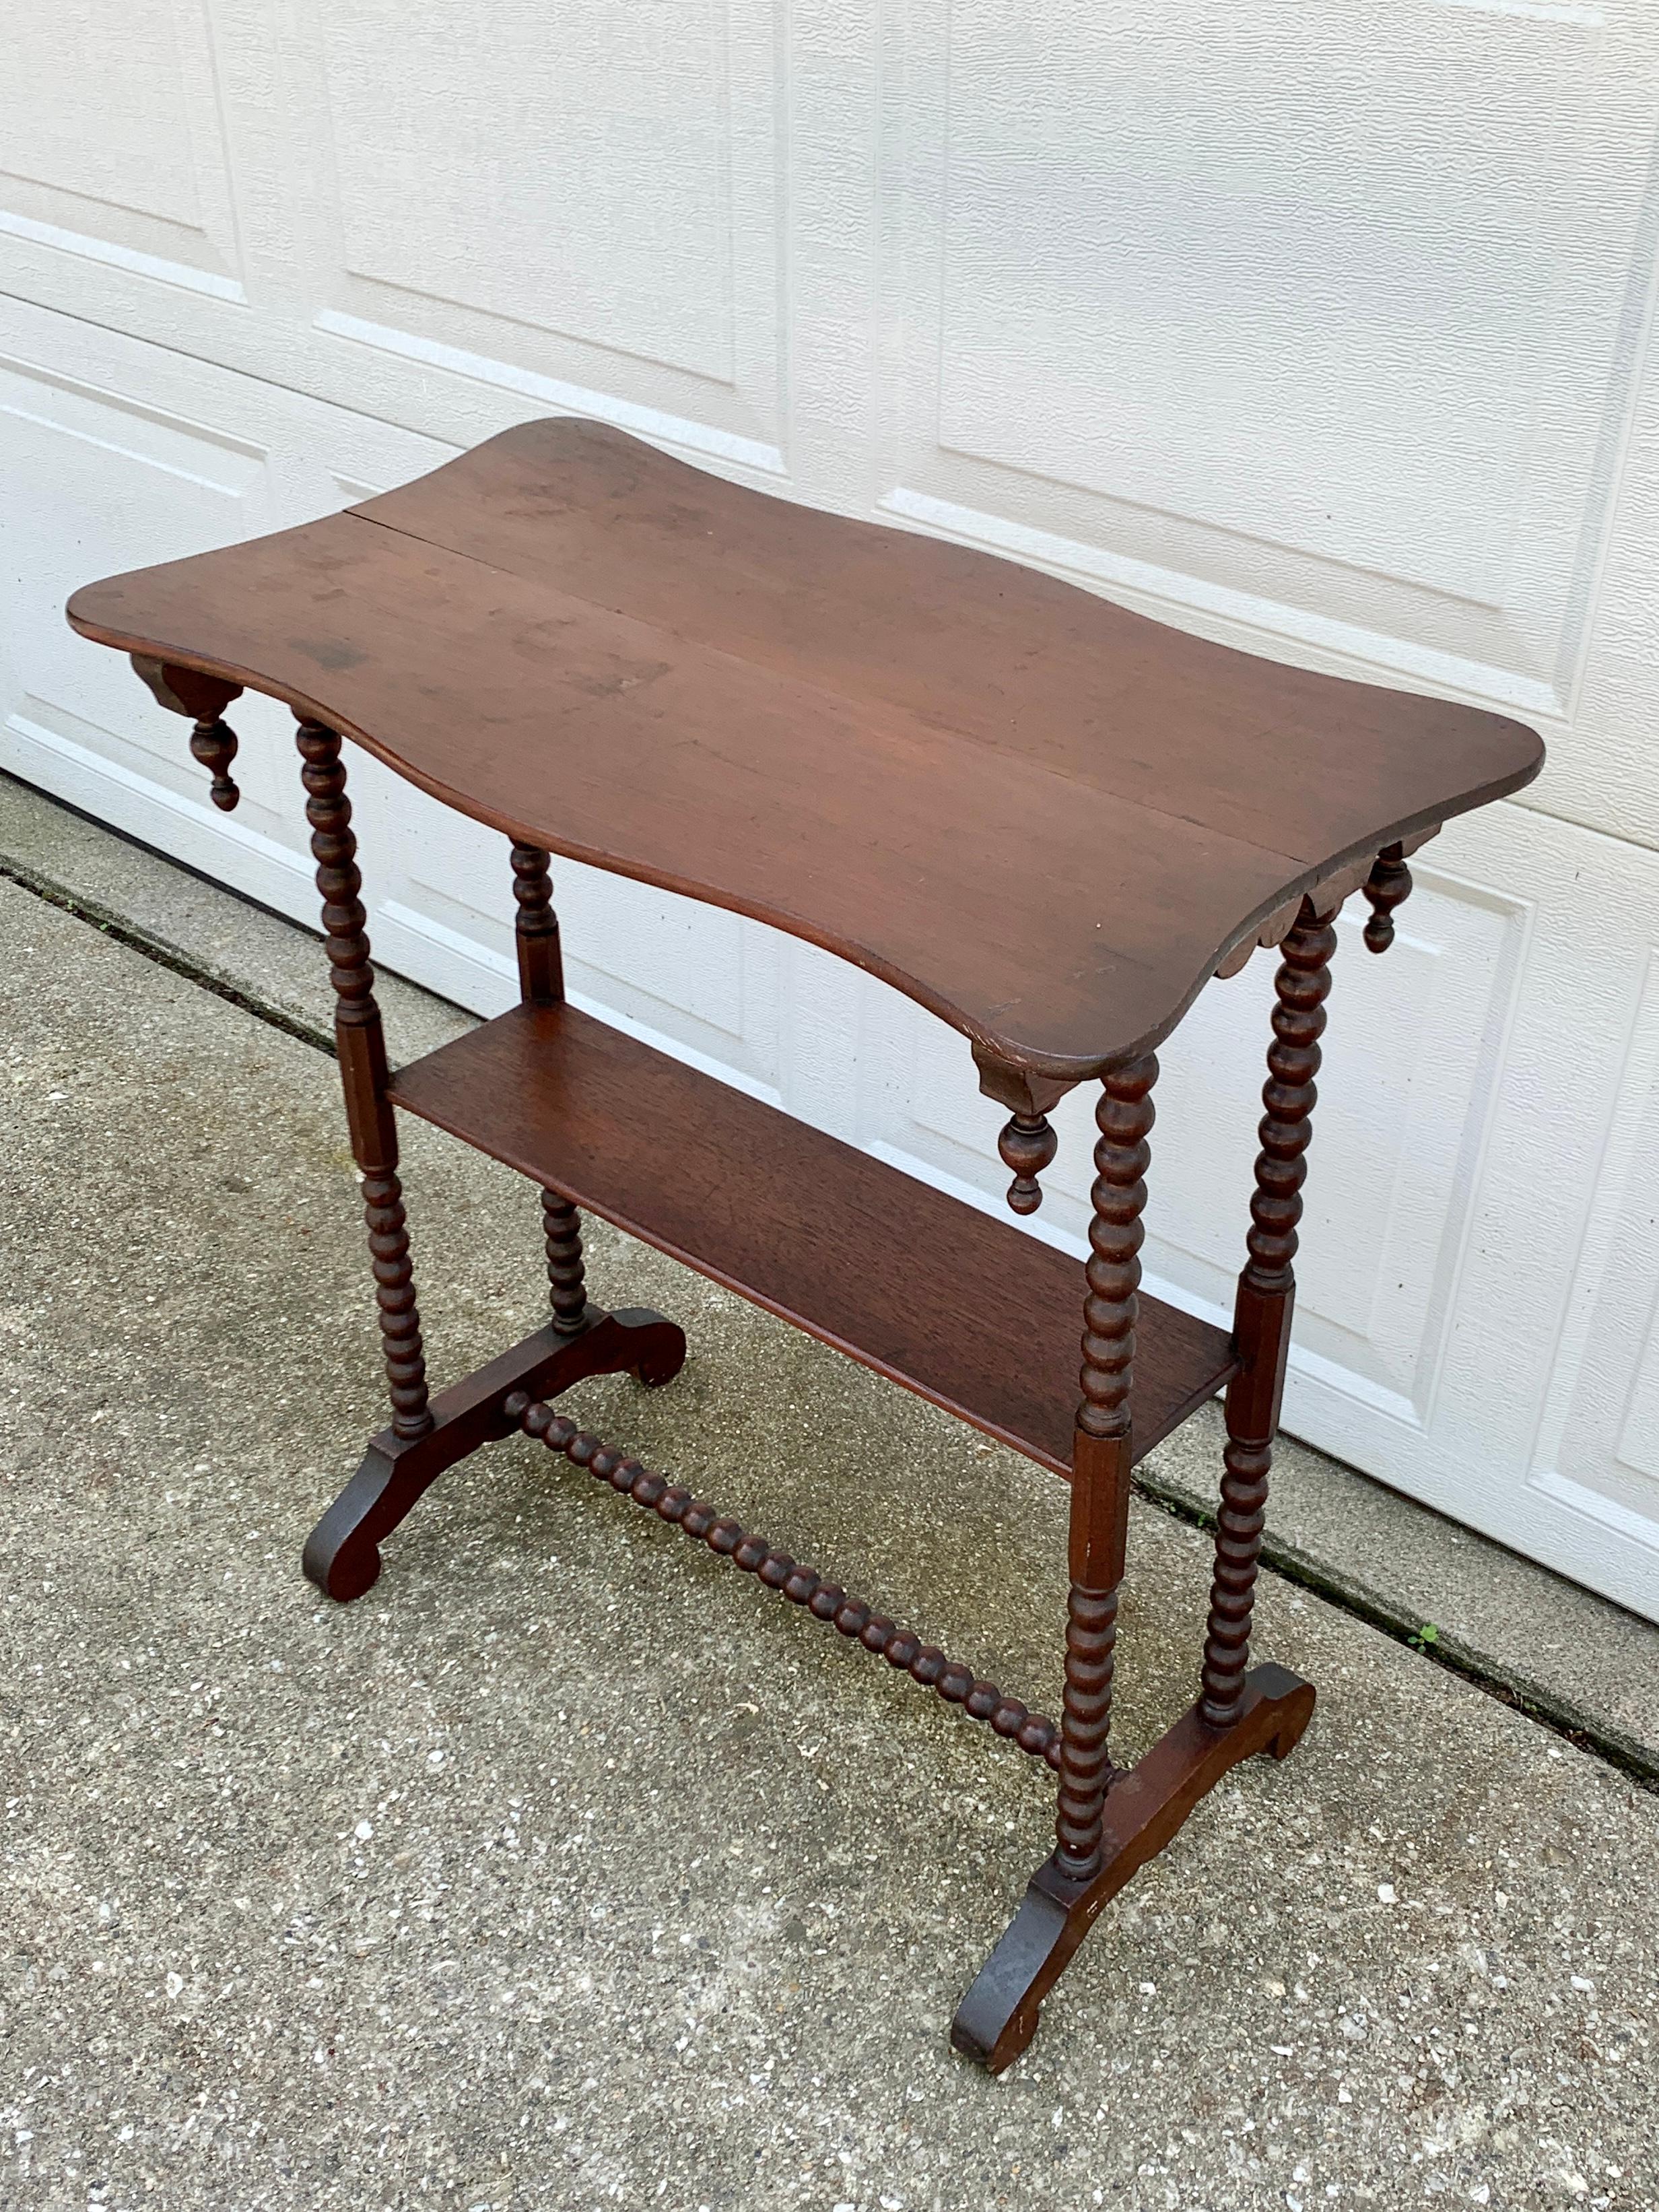 A gorgeous Victorian walnut side table with a lower shelf and carved finial details

USA, circa late 19th century

Measures: 26.25